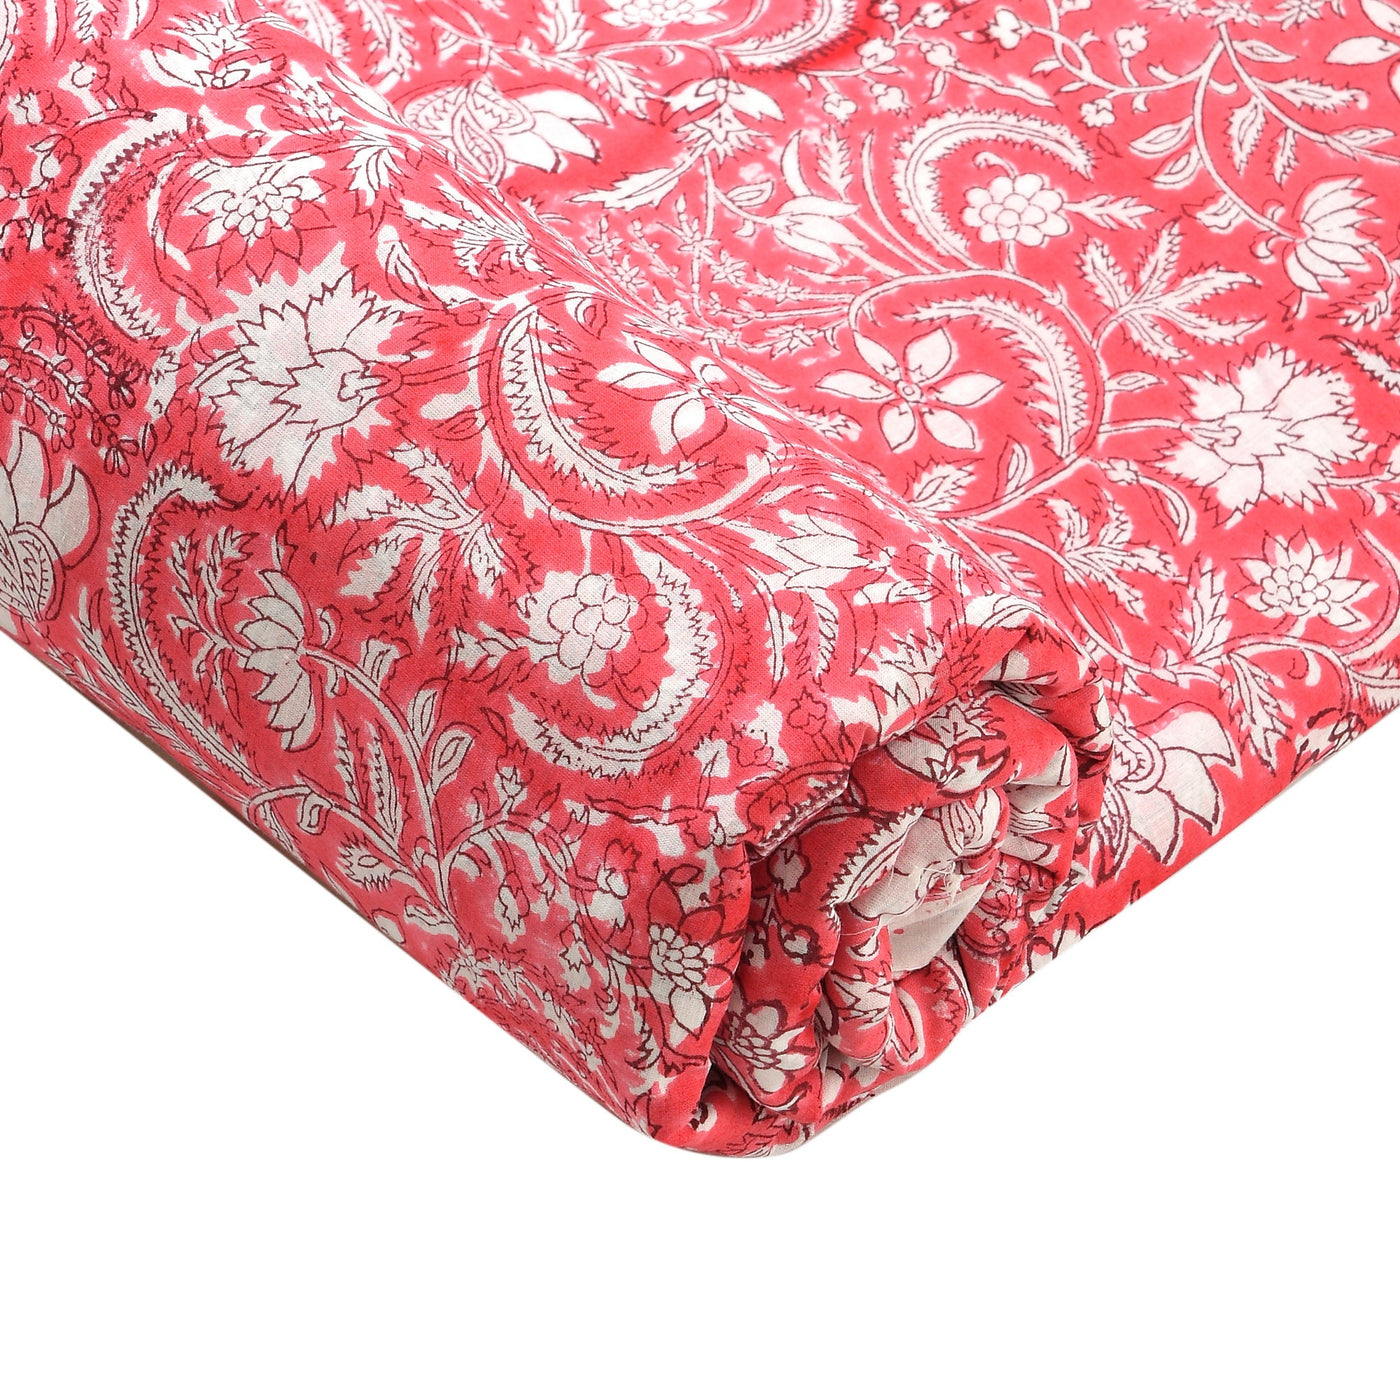 Fabricrush Brick Pink and White Indian Block Floral Printed 100% Pure Cotton Cloth, Lightweight Summer Fabric for Curtains Women's Dresses Pillows Bags